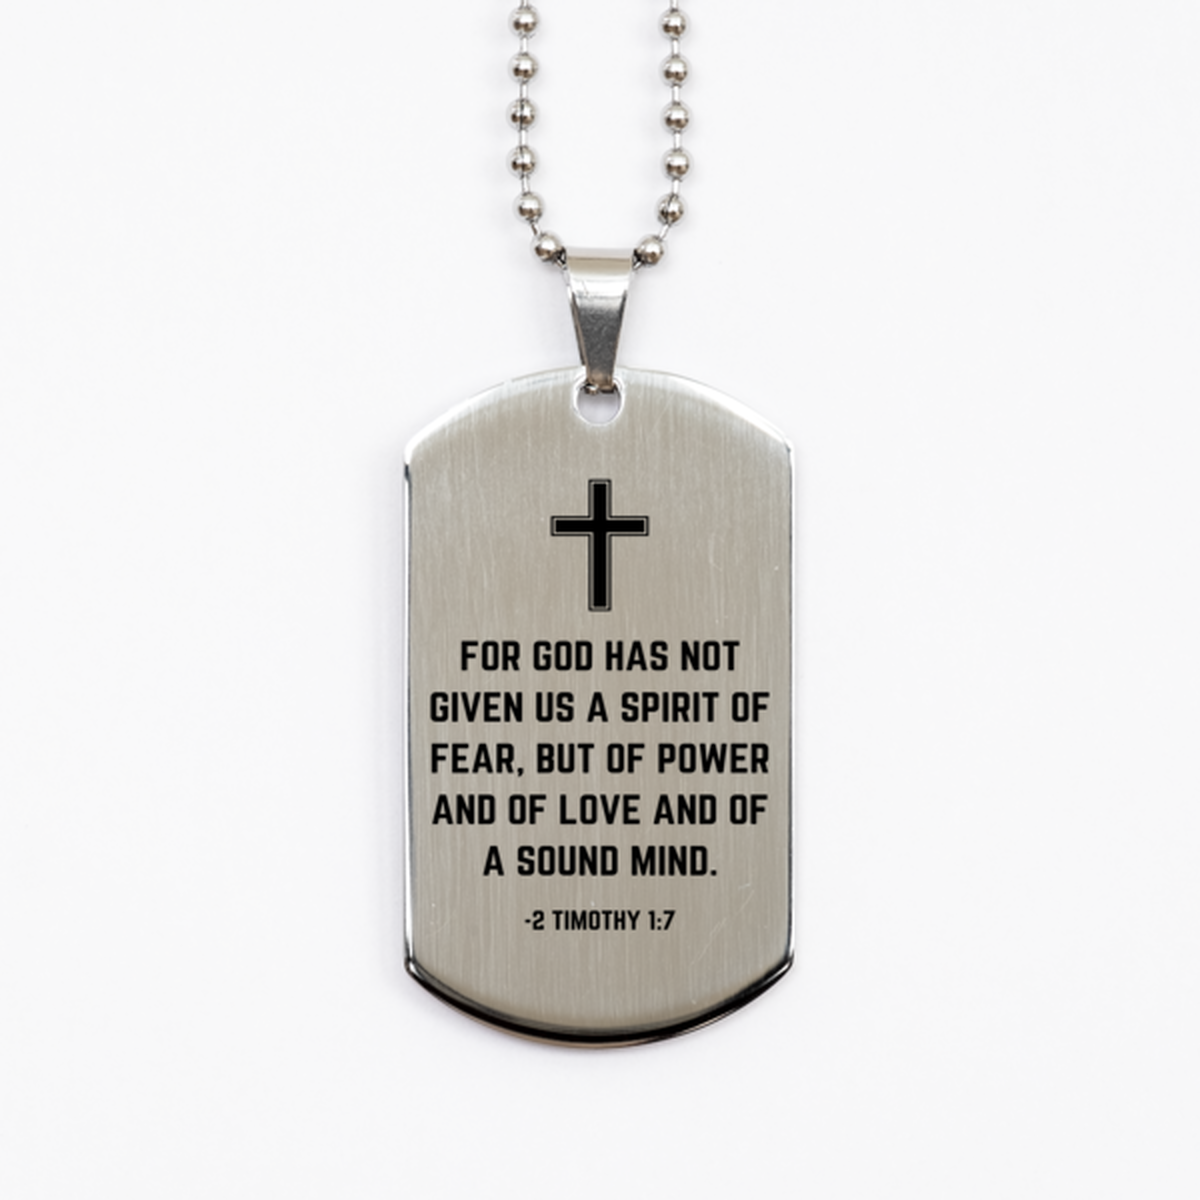 Baptism Gifts For Teenage Boys Girls, Christian Bible Verse Silver Dog Tag, For God has not given us, Confirmation Gifts, Bible Verse Necklace for Son, Godson, Grandson, Nephew